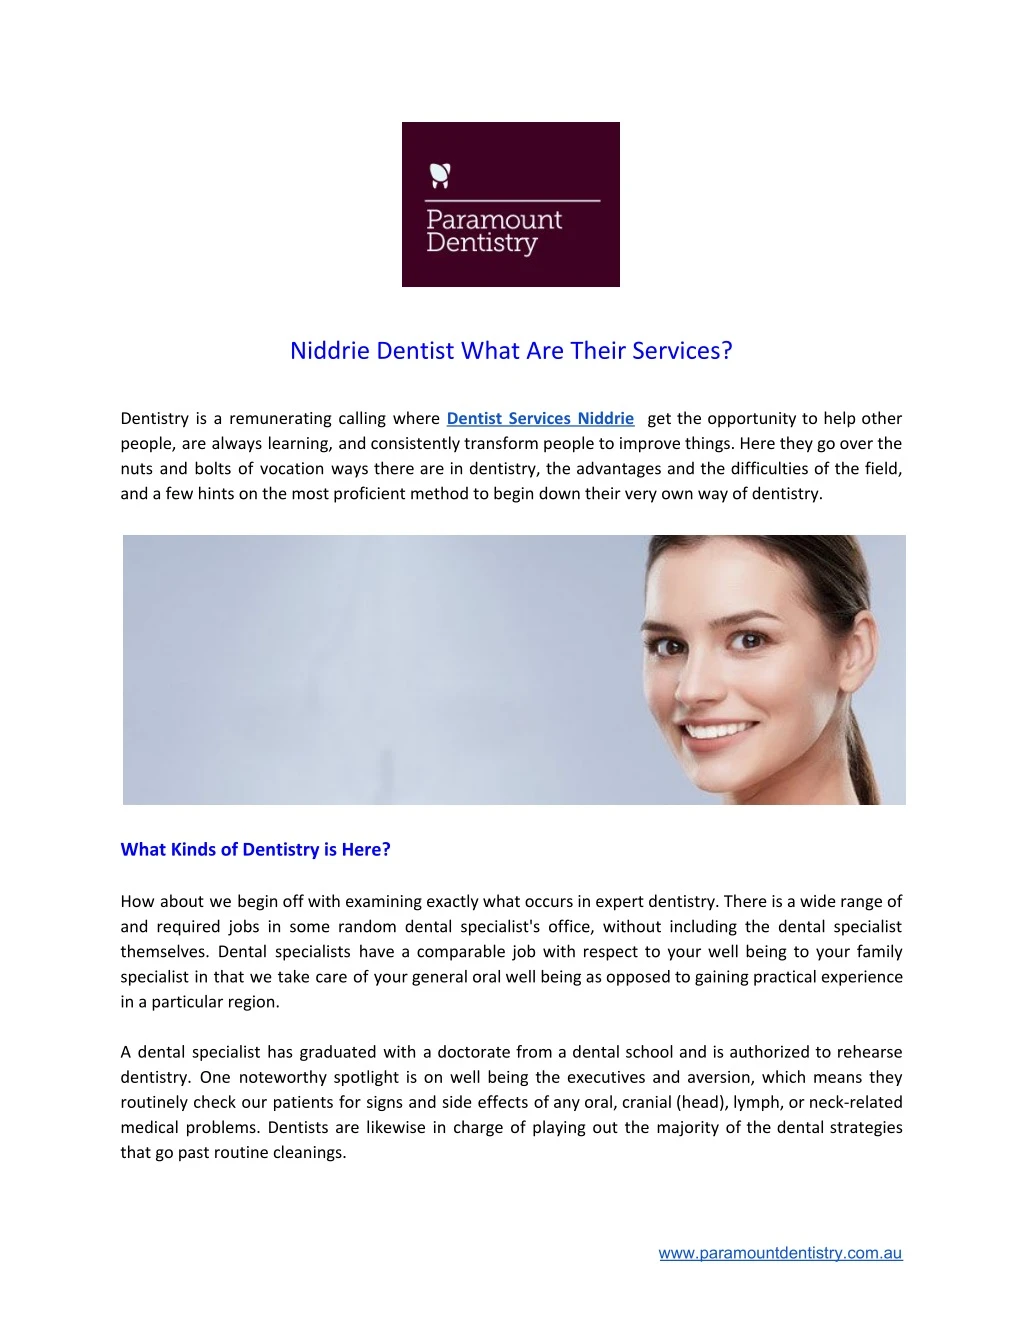 niddrie dentist what are their services dentistry